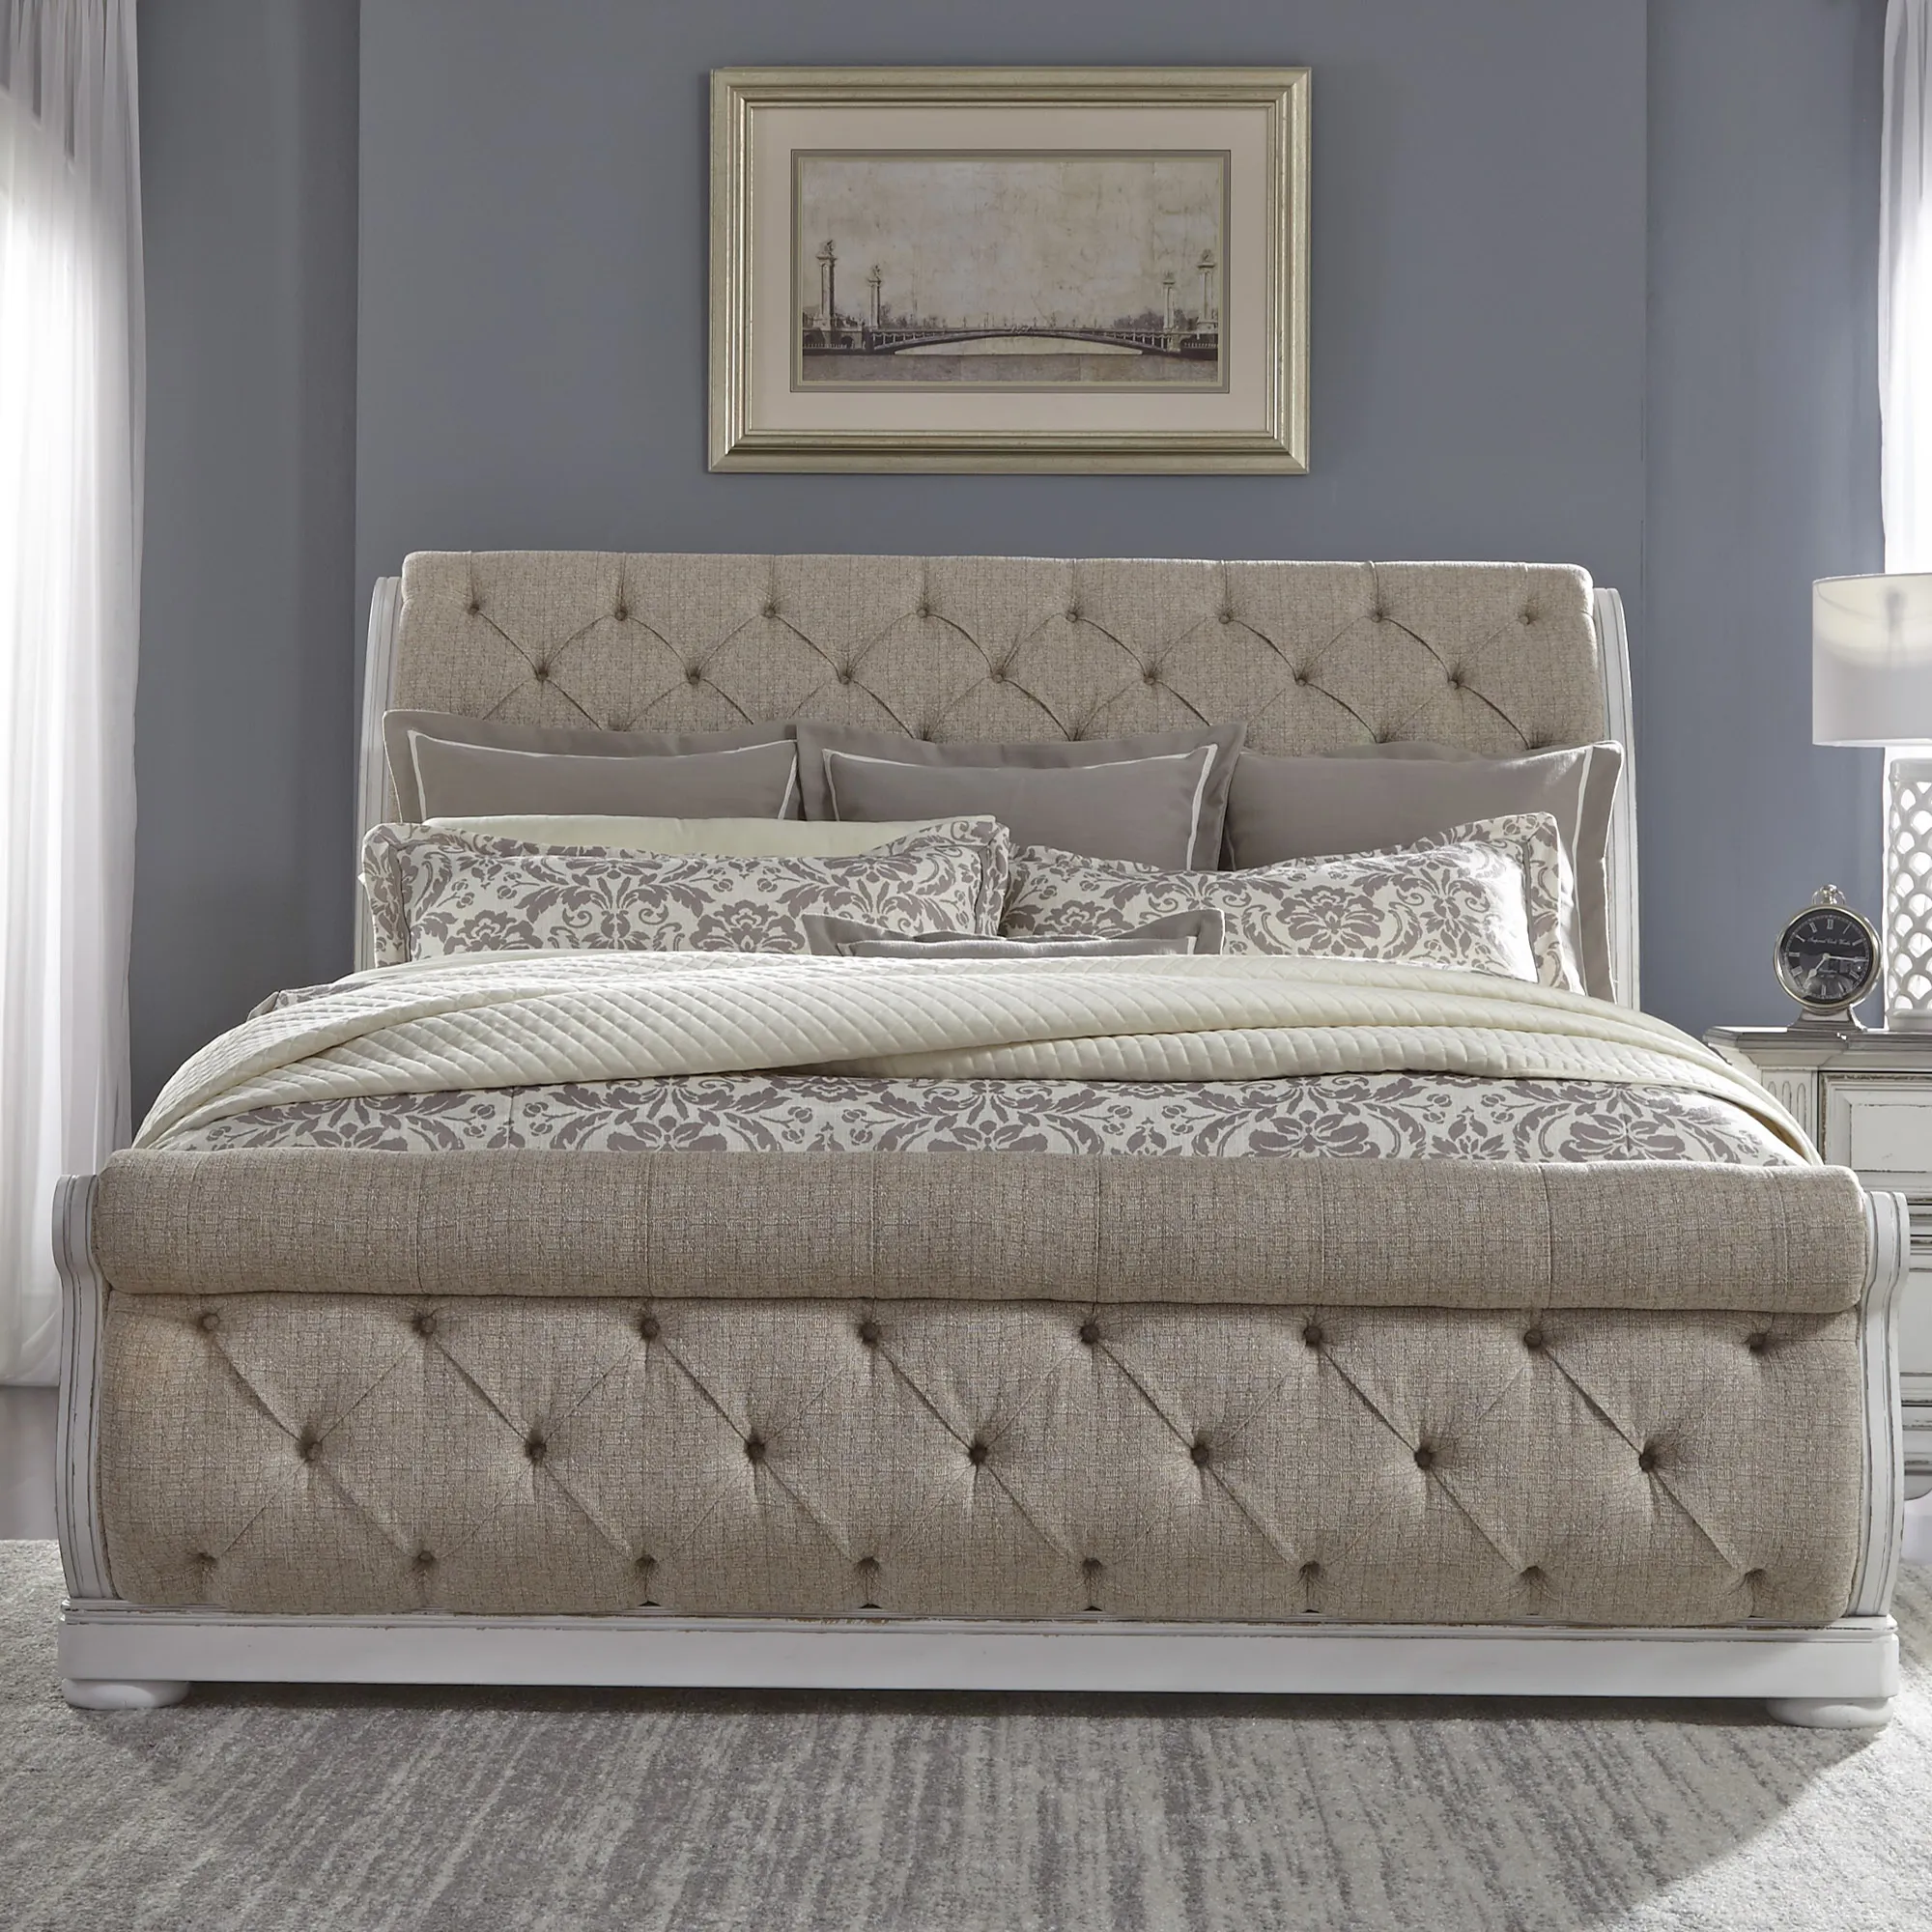 KING UPHOLSTERED SLEIGH BED - ABBEY PARK